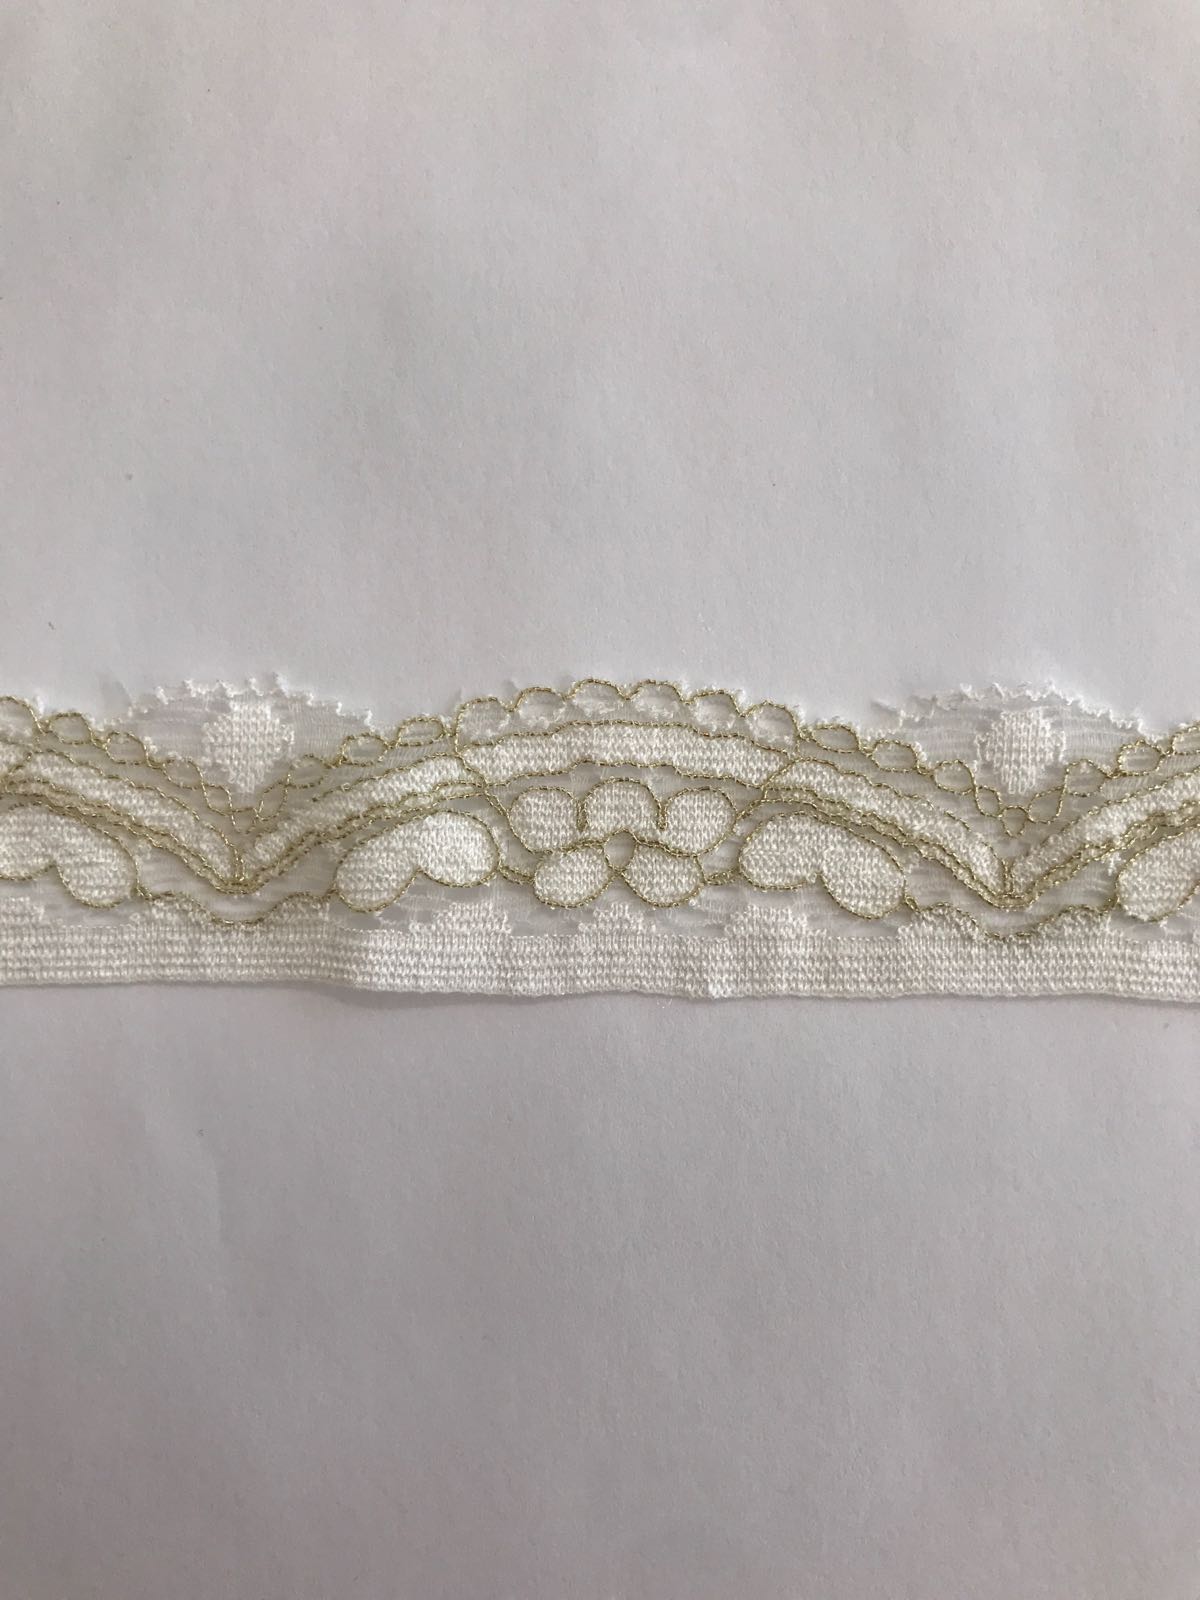 Stretch lace with gold 28 mm